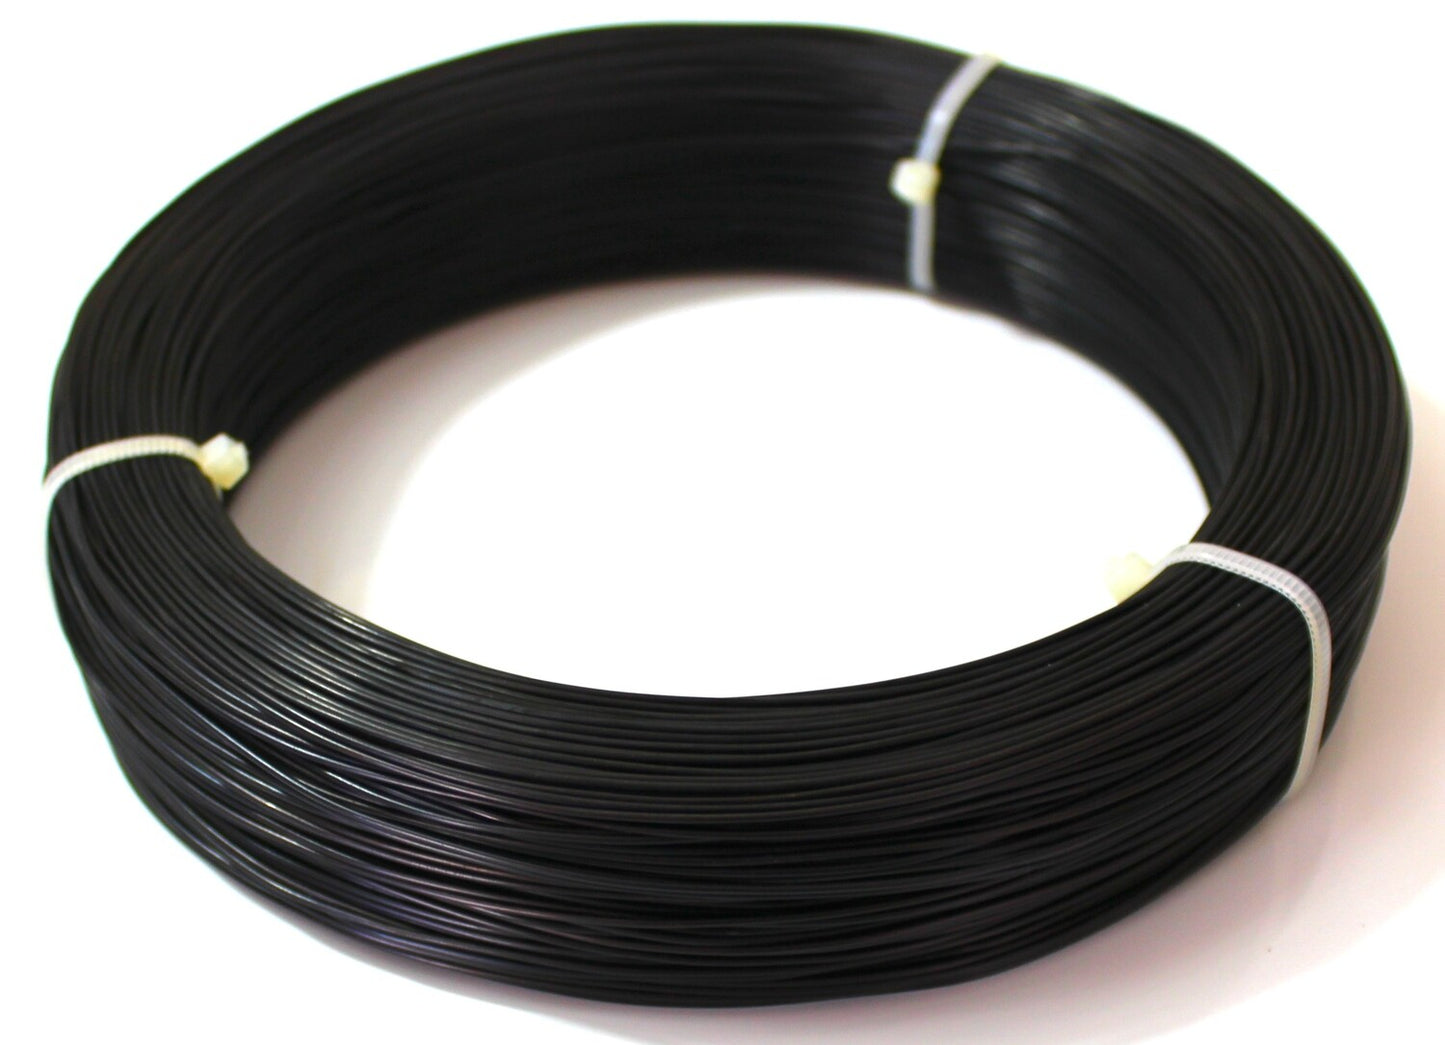 Bonsai Styling Wire 500 gram pack - choose the size you require